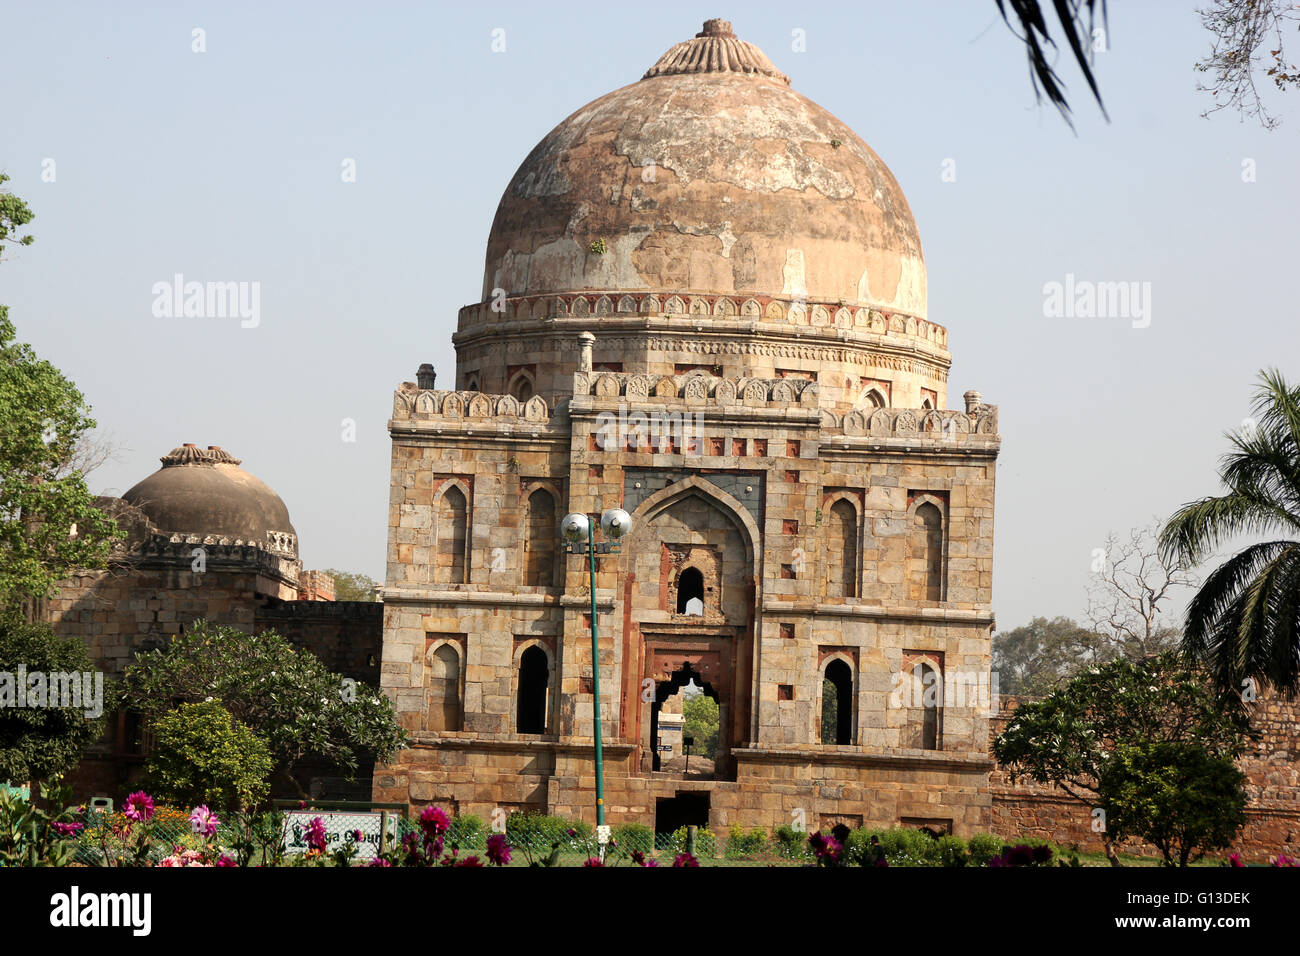 Bada Gumbad Mosque, Lodhi Gardens, Delhi, big dome shaped mosque constructed in 1494 during Lodhi dynasty Stock Photo